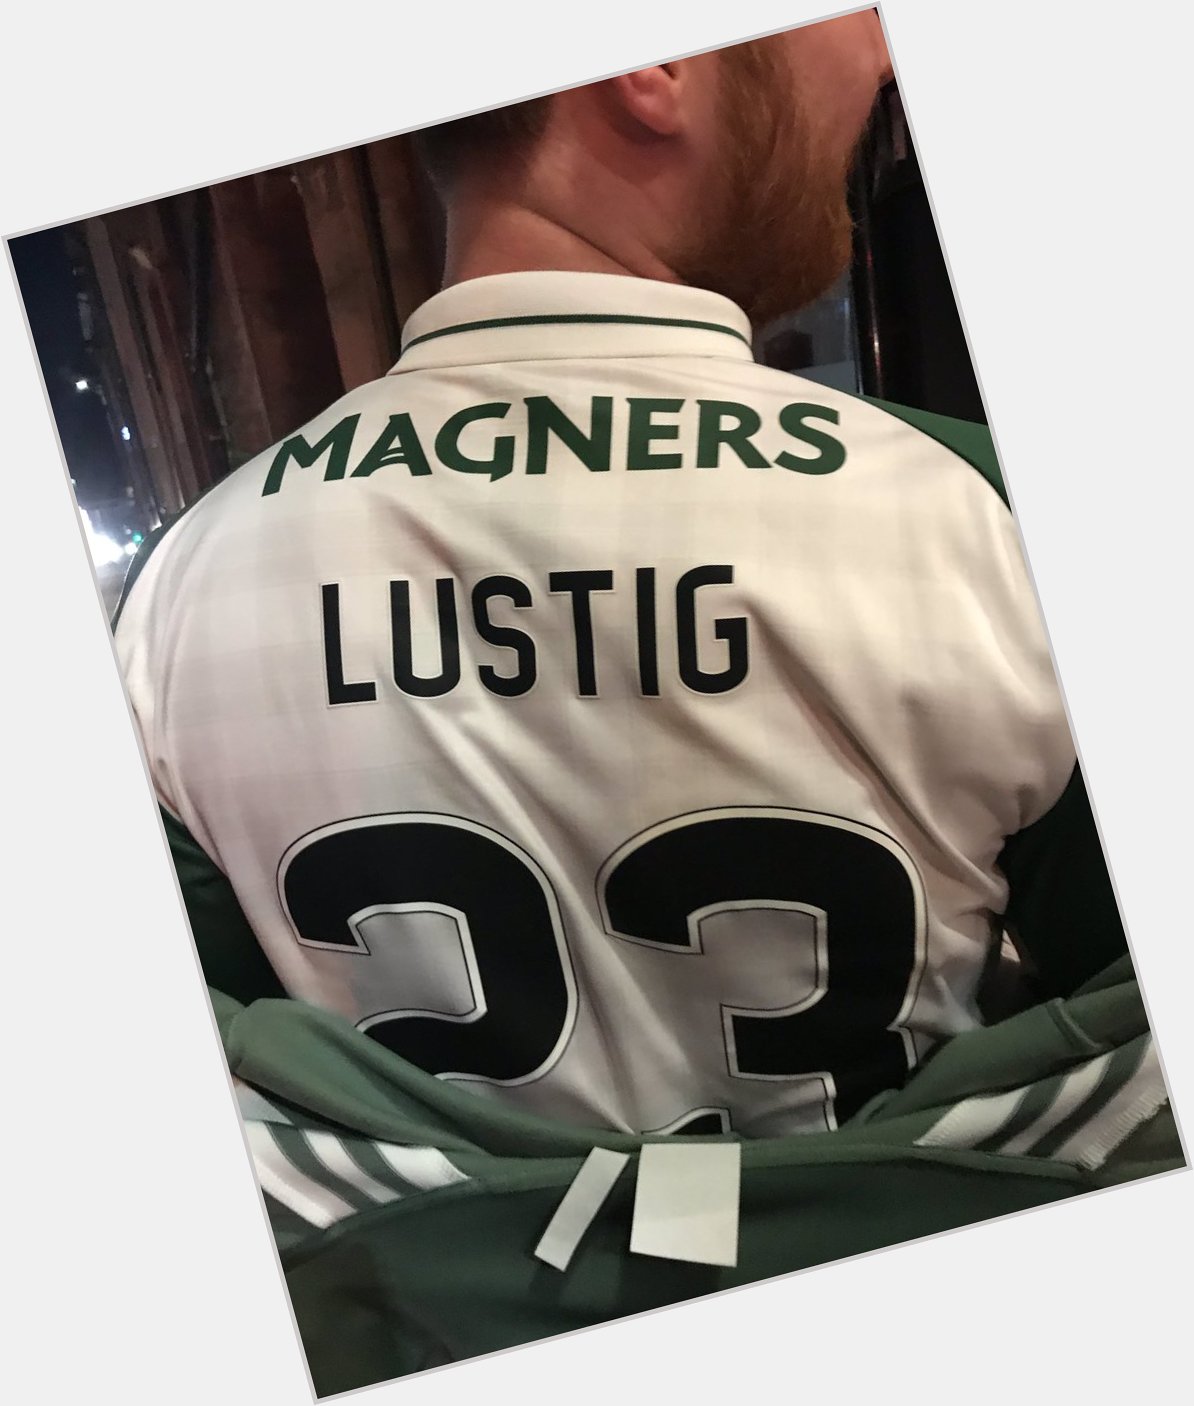 Happy birthday to the true heir to the throne Mikael Lustig 